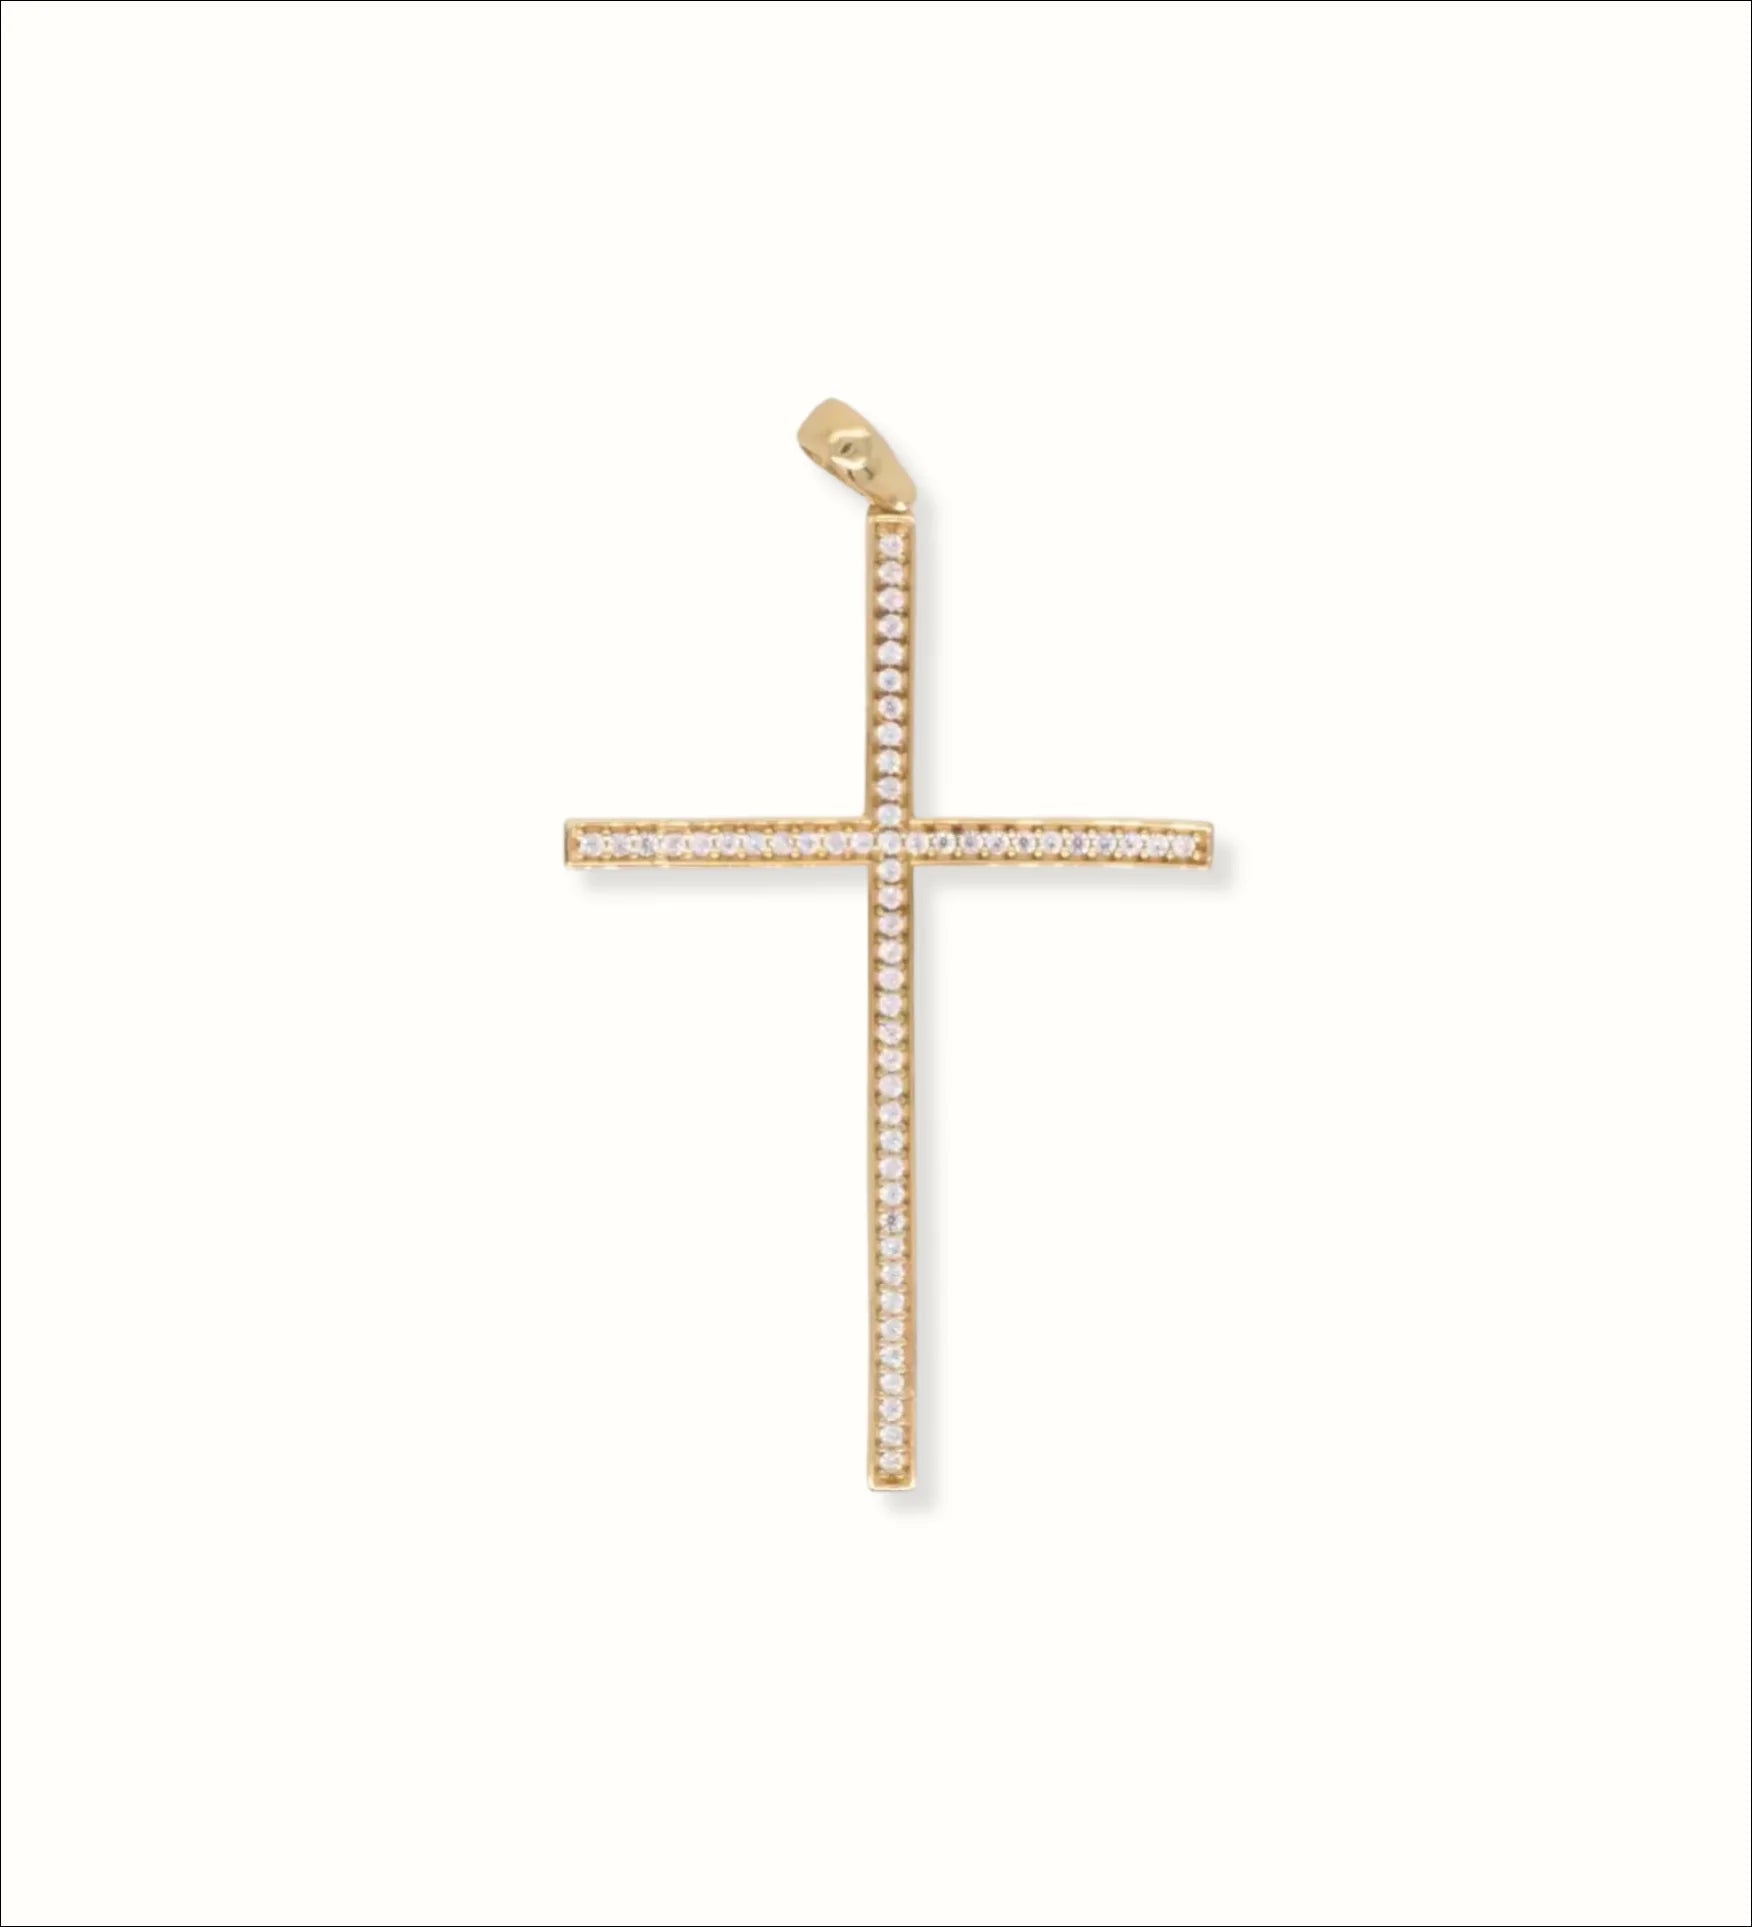 Elegant 18k Gold Cross with CZ Stones | Home page